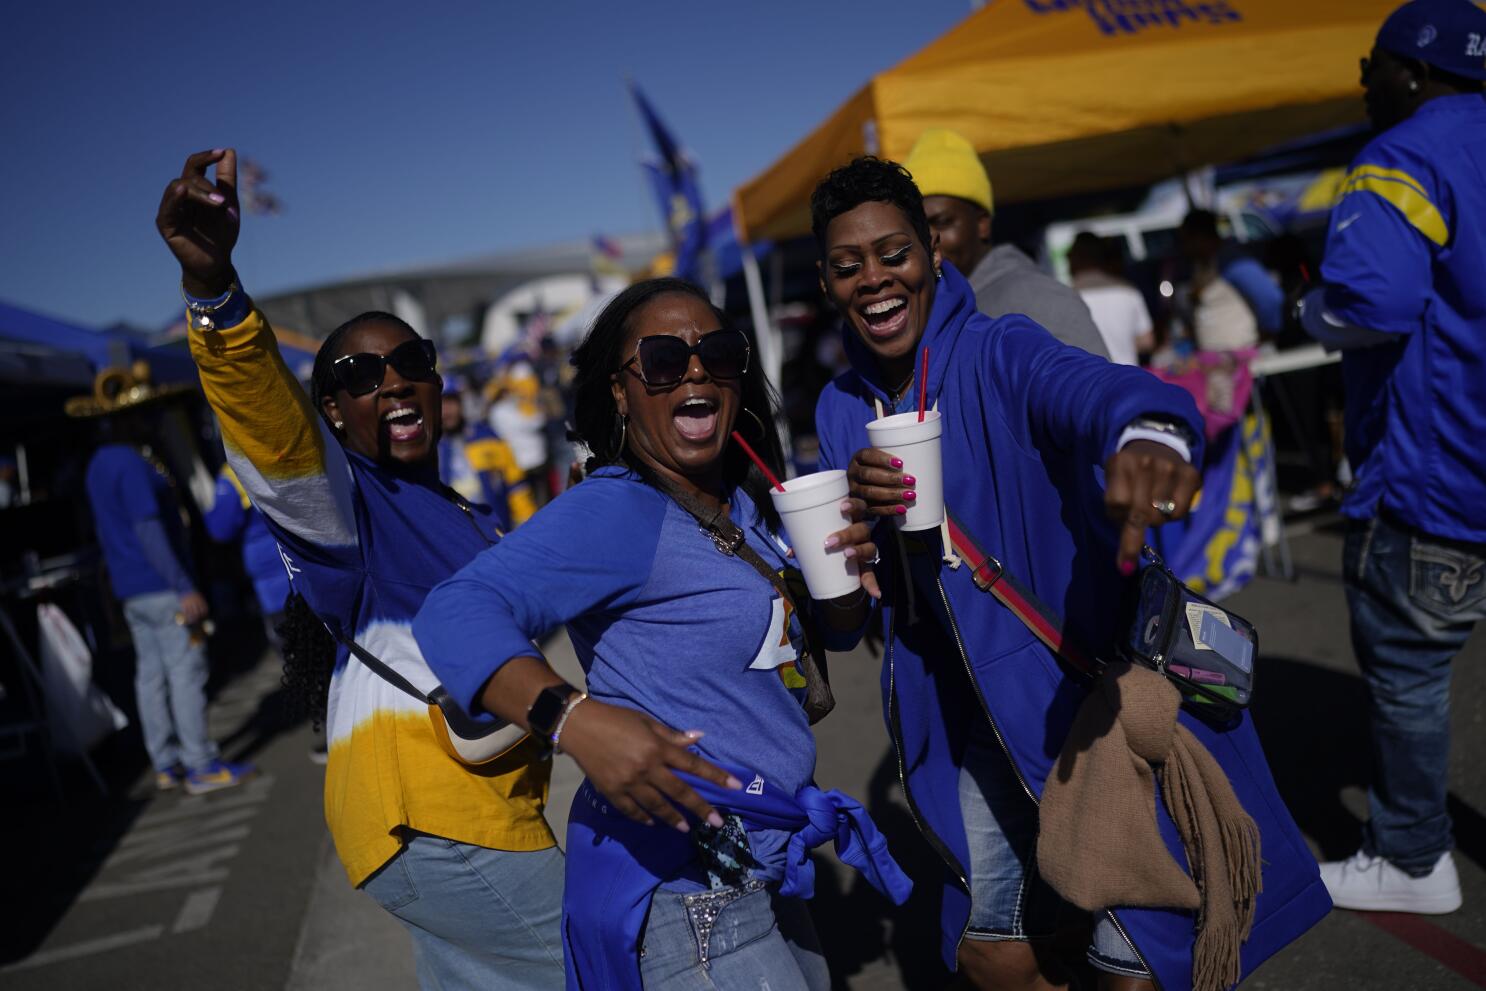 Memphis fans can't control conference realignment. So enjoy the tailgate